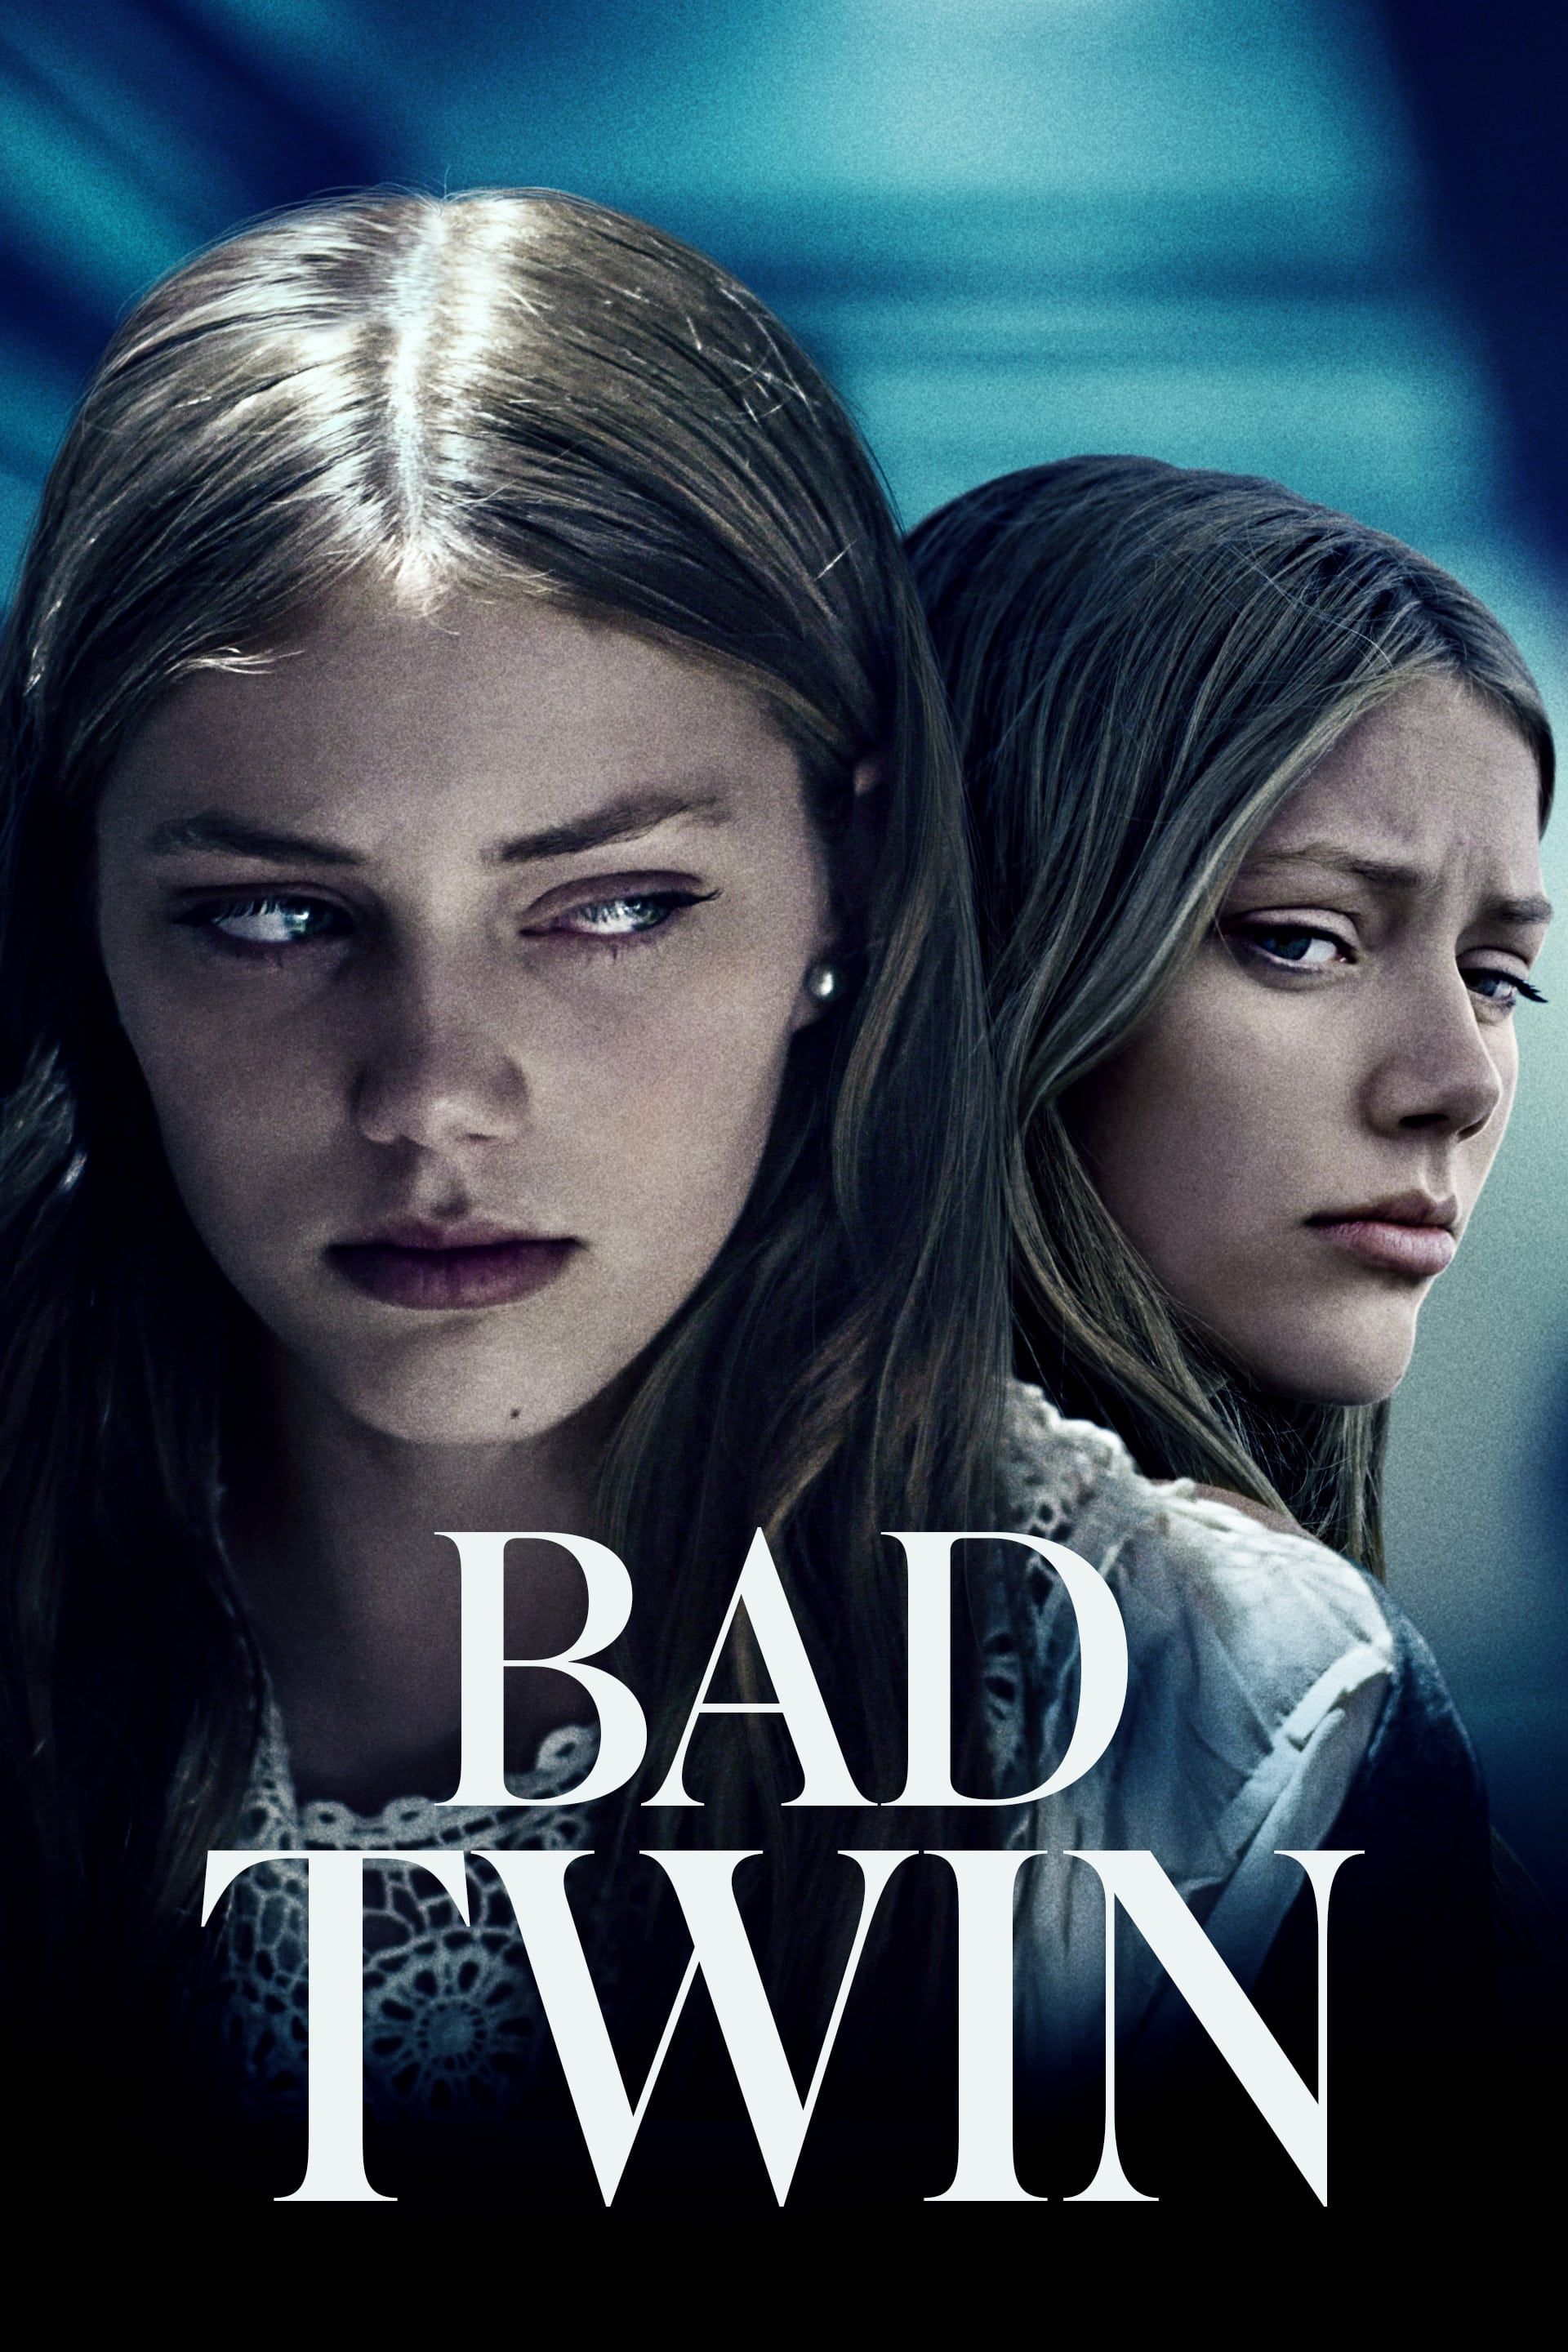 Watch How to Be Really Bad Full movie Online In HD